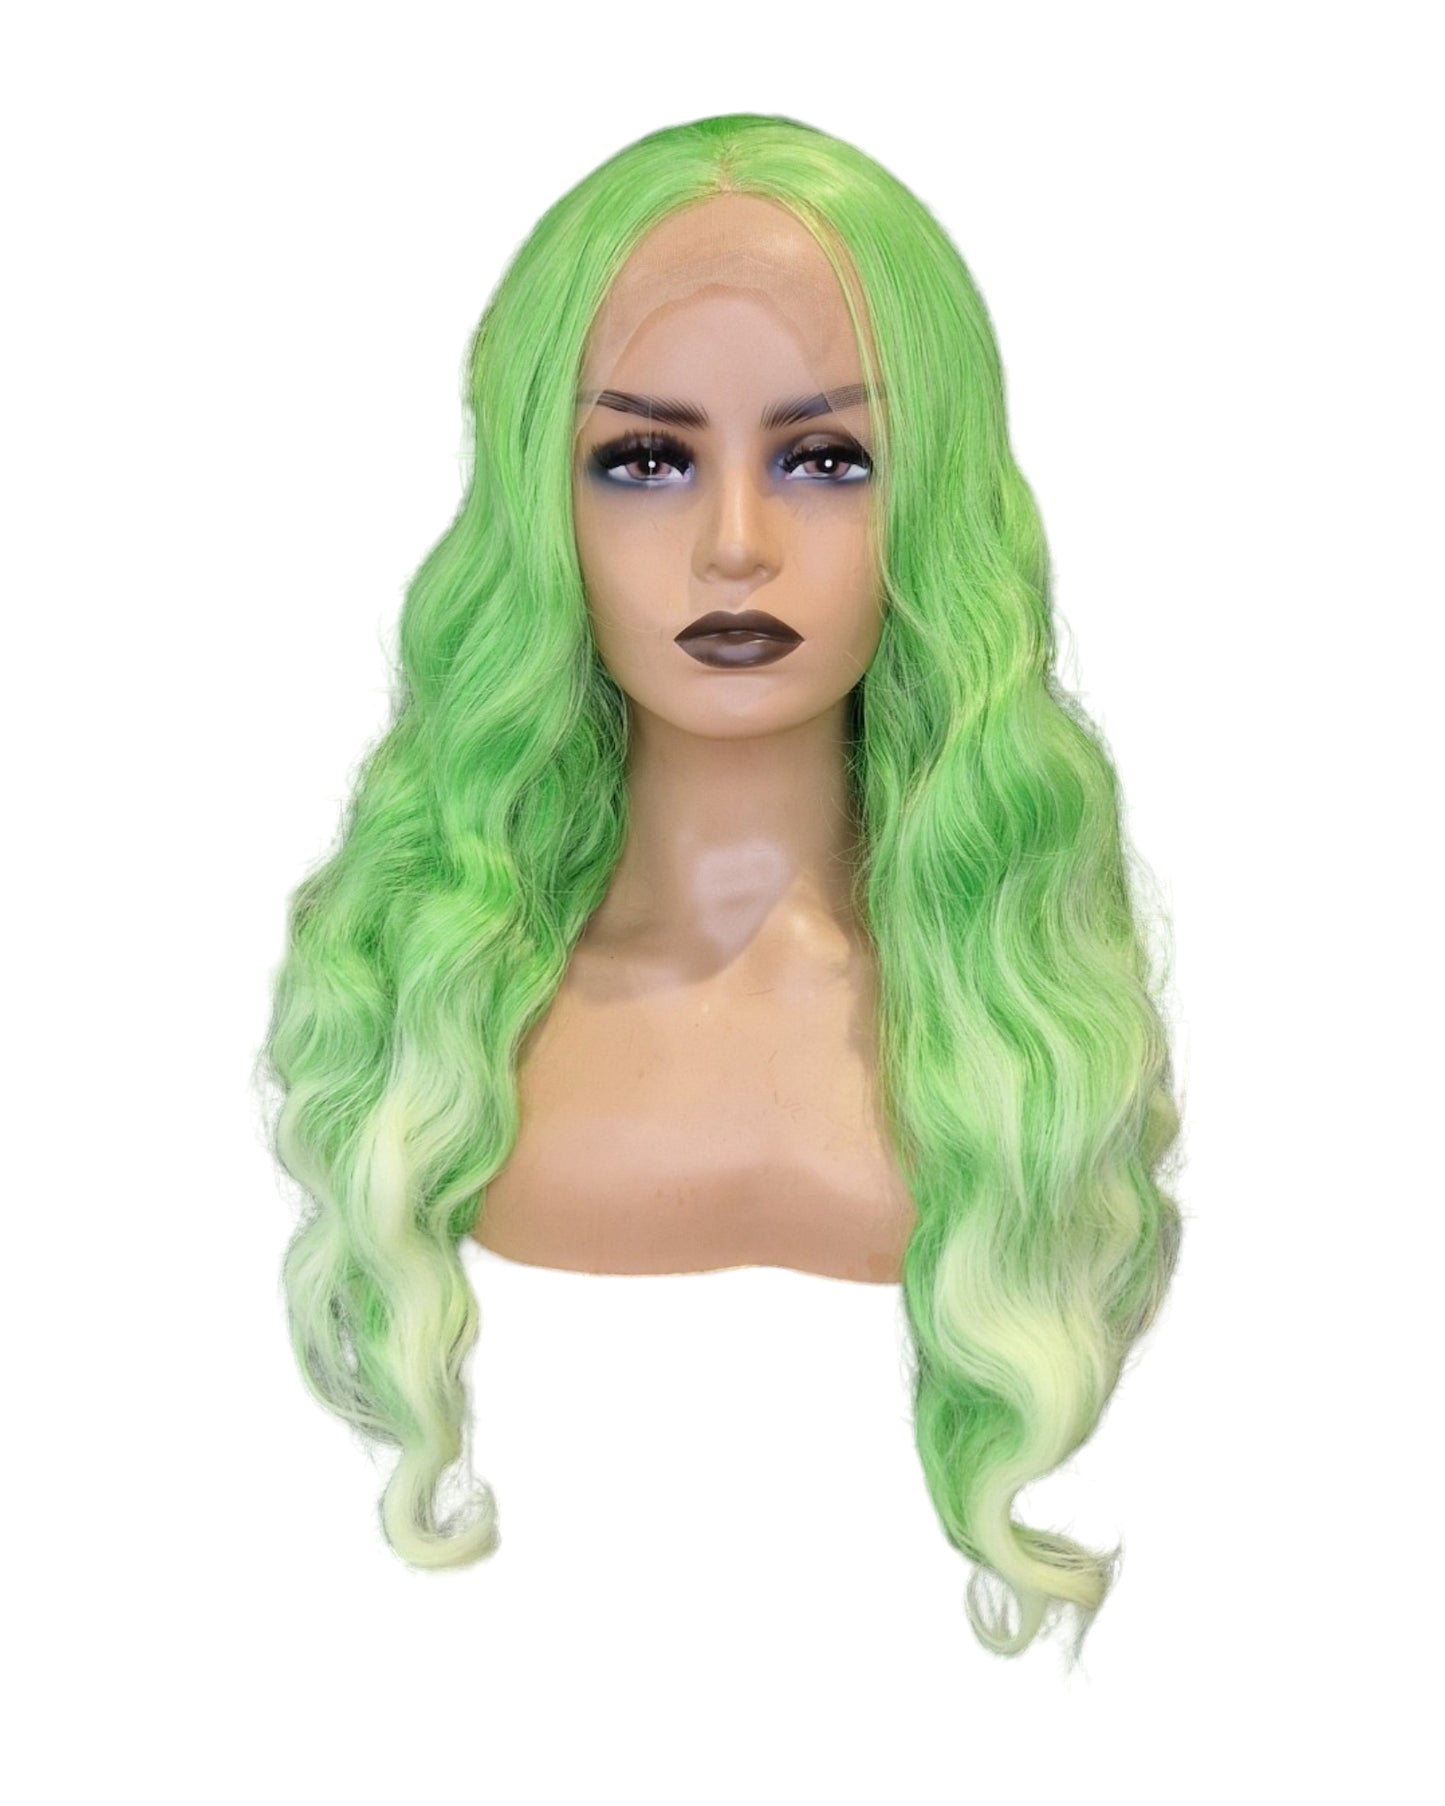 Green Ombre Wavy Lace Front Wig. Viper